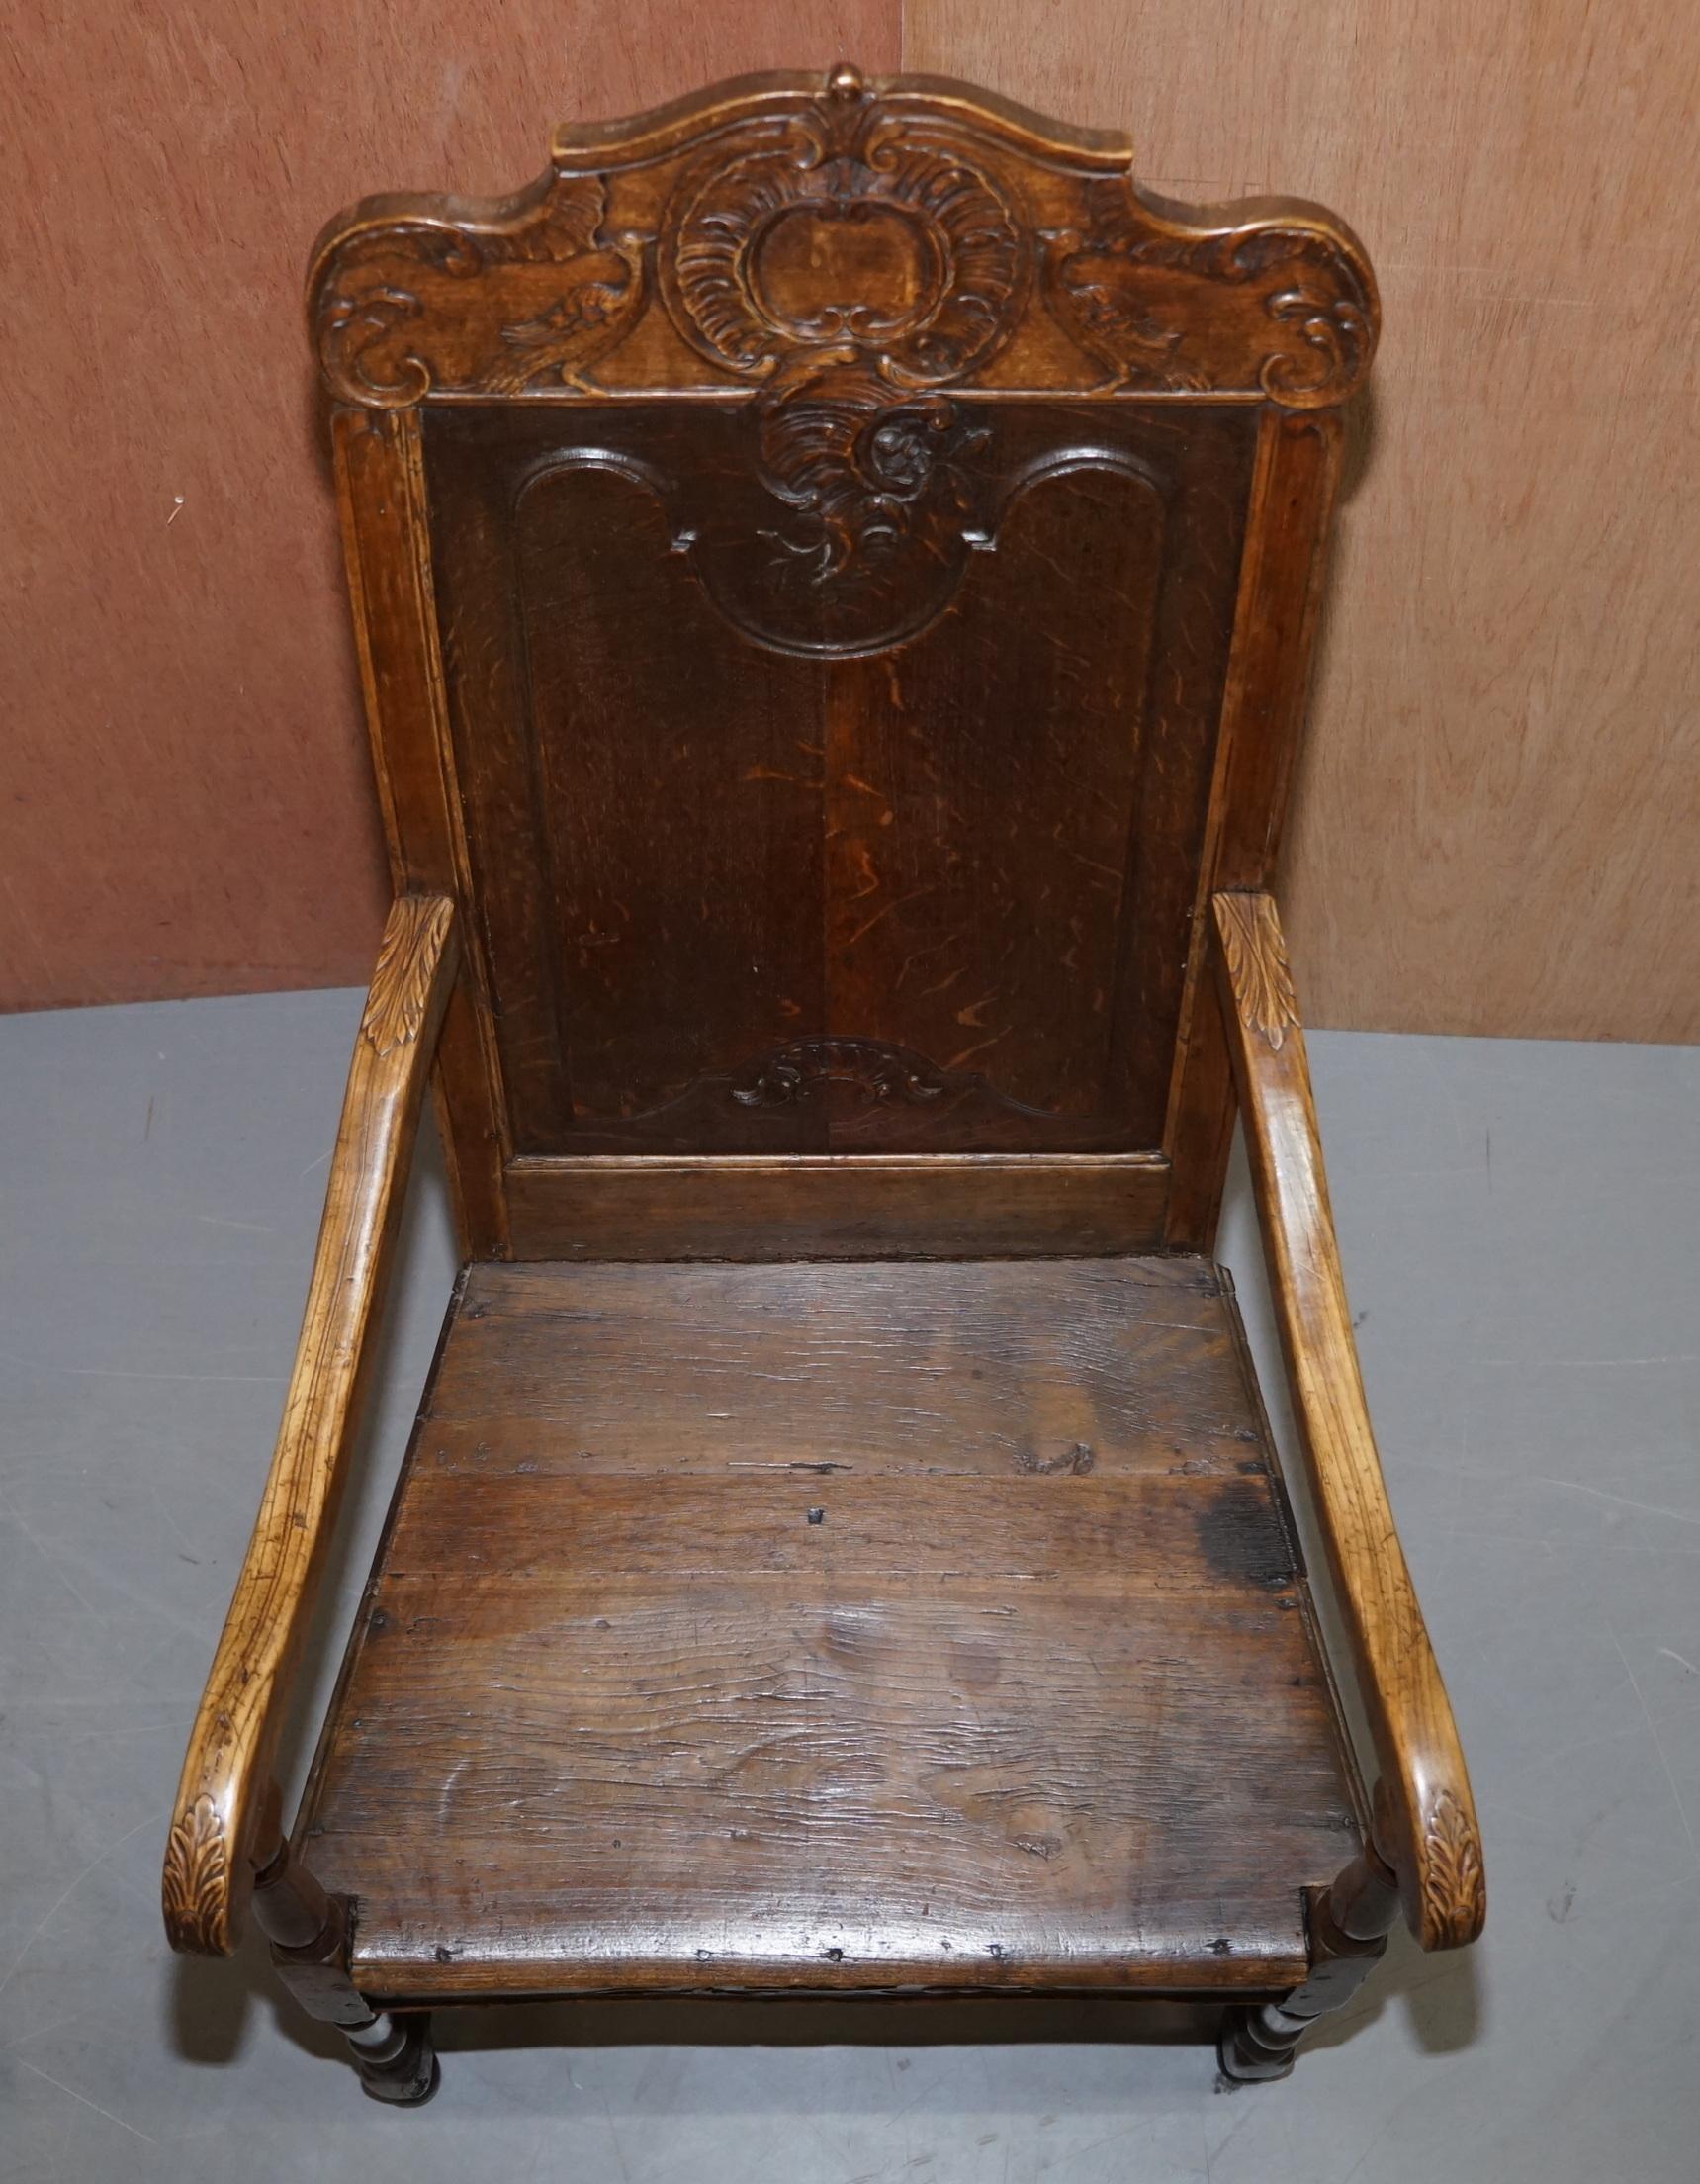 Oak Lovely Original 18th Century Herve Liege Belgium Carved Wood Armchair Wainscot For Sale